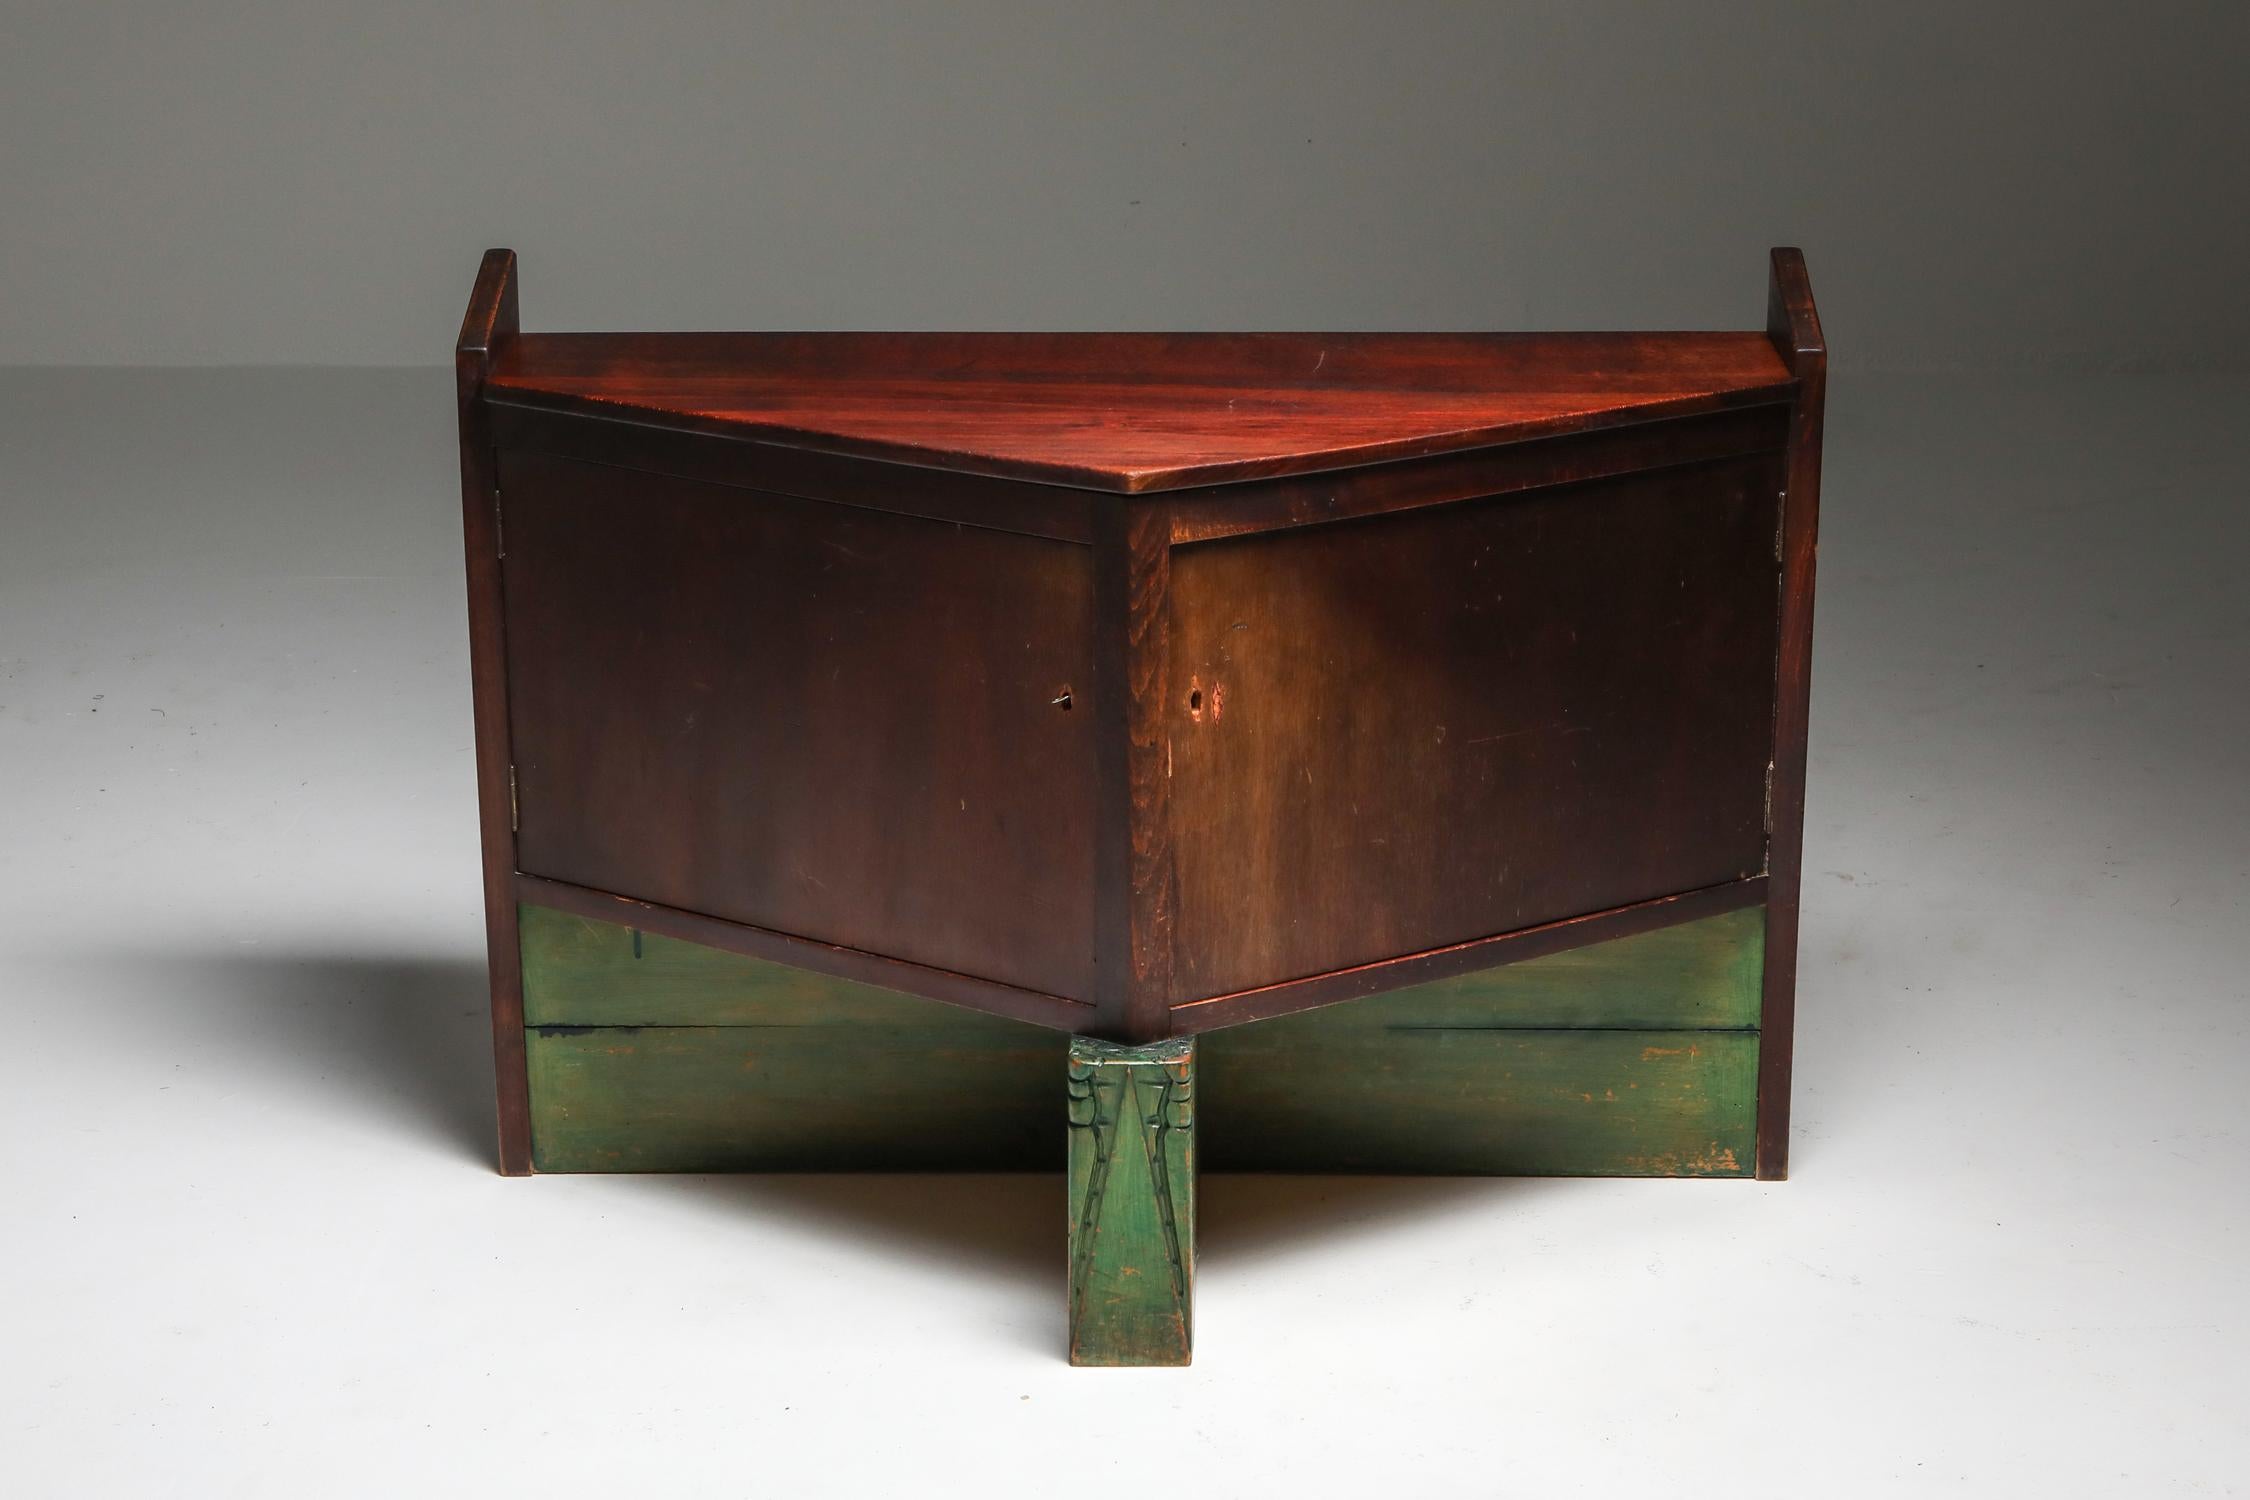 Hildo Krop, Dutch modernist 'Amsterdam School' cabinet, Netherlands, 1920s

Rare dutch modernist piece from the early 1920s
It caries elements of the expressive and dramatic Amsterdam School style. But also a reduction to the essentials of form